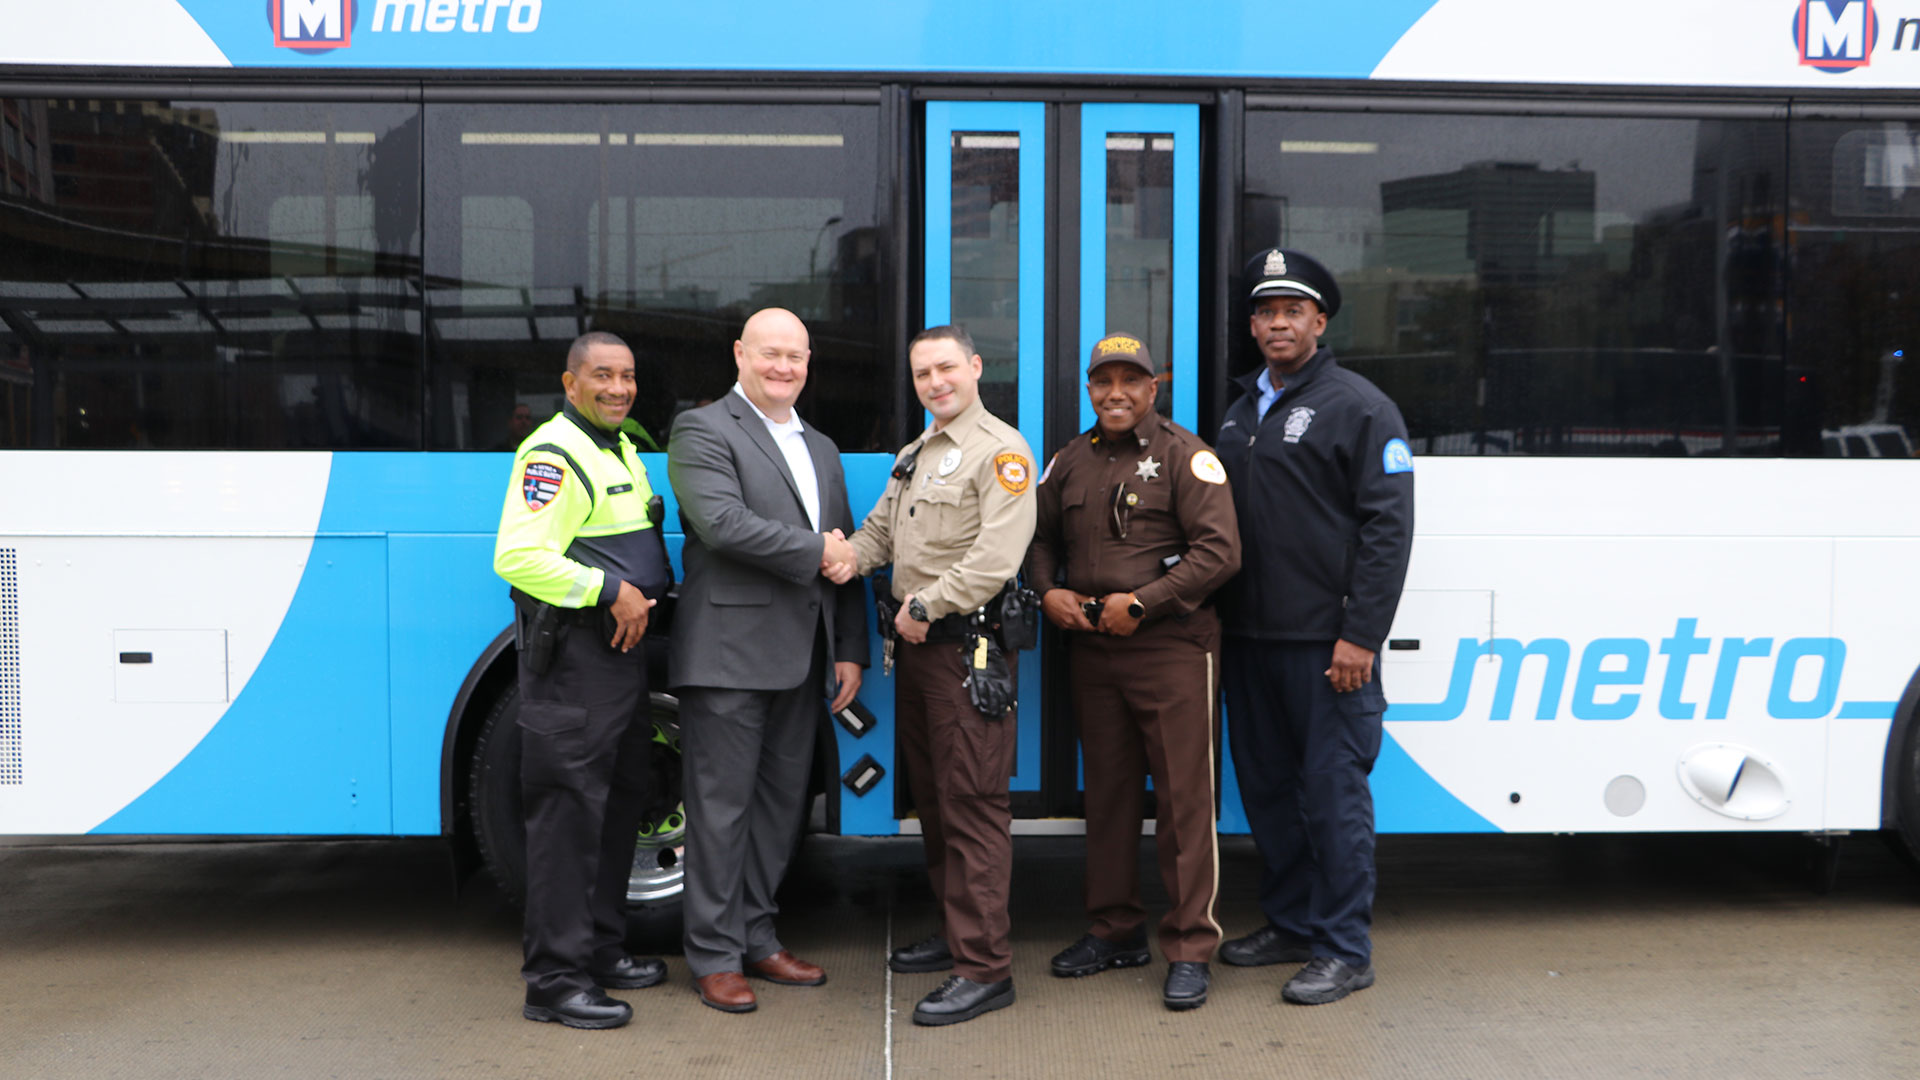 Kevin Scott shaking hands with various security professionals in front of a Metro bus.